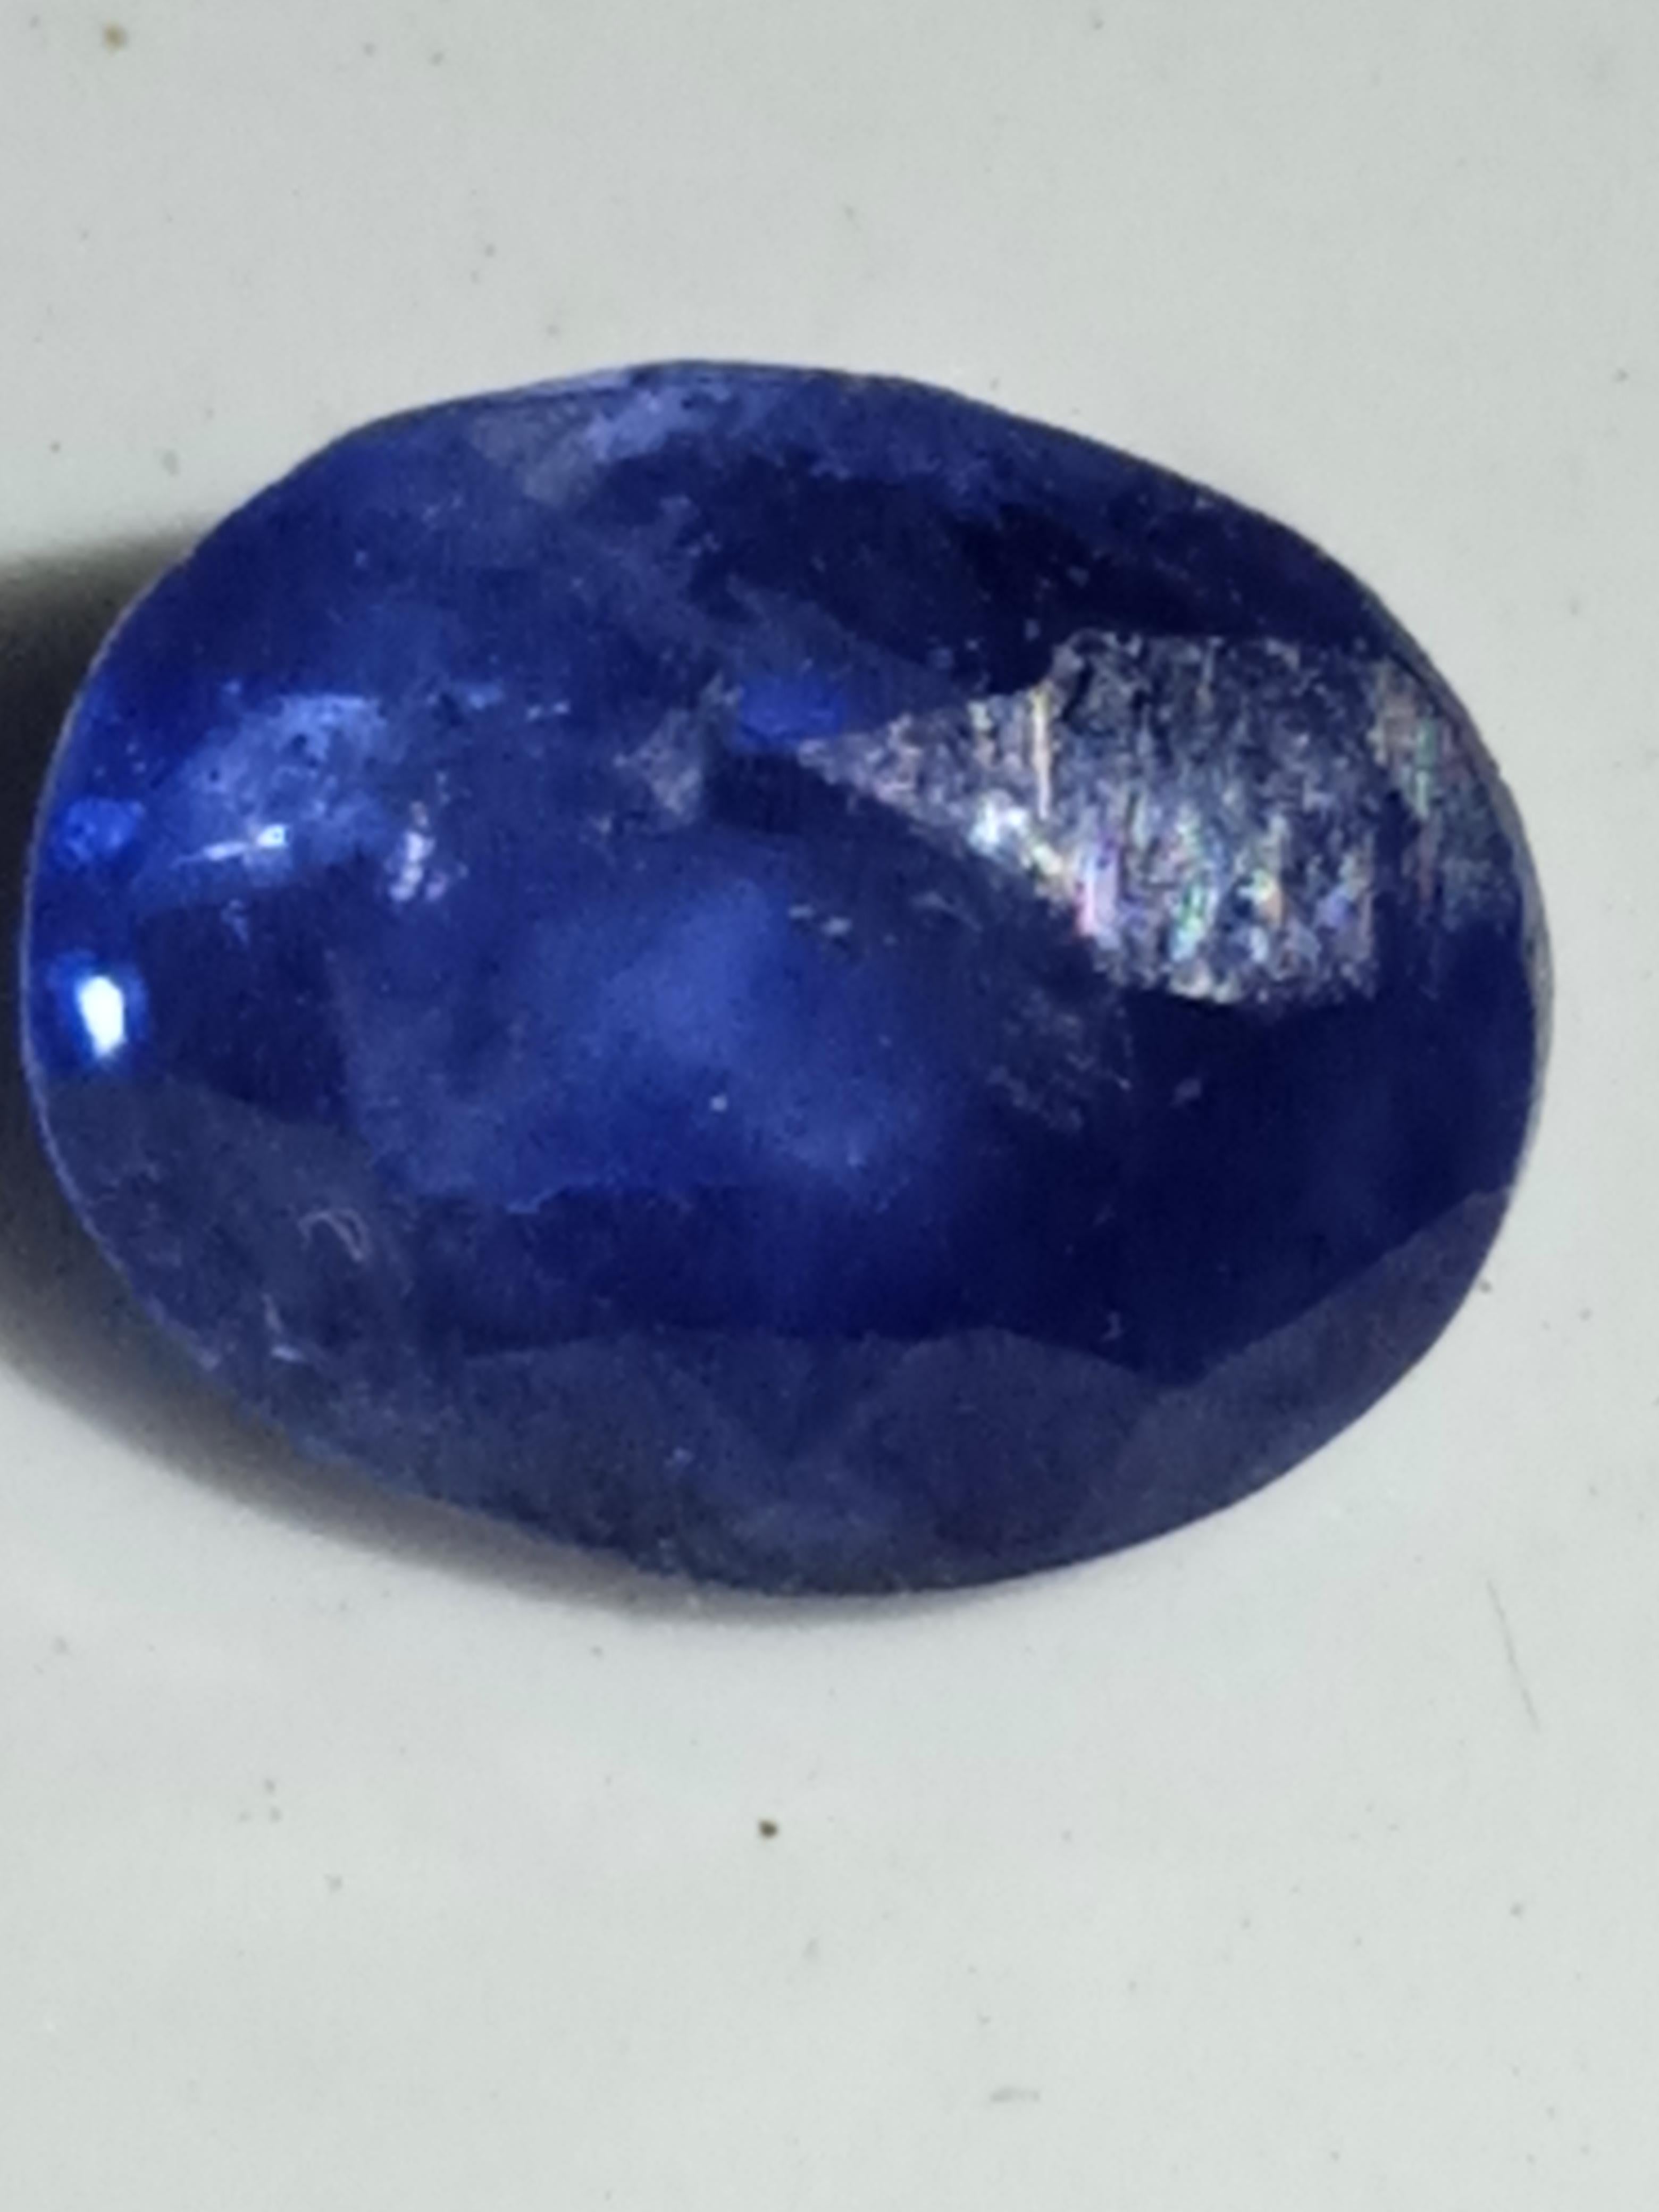 This beautiful oval-shaped blue sapphire weighs 1.50 carats and originates from Sri Lanka. The gemstone has excellent cut grade and eye-clean clarity. 

It is a natural sapphire that has not been treated or heated in any way. The gemstone measures